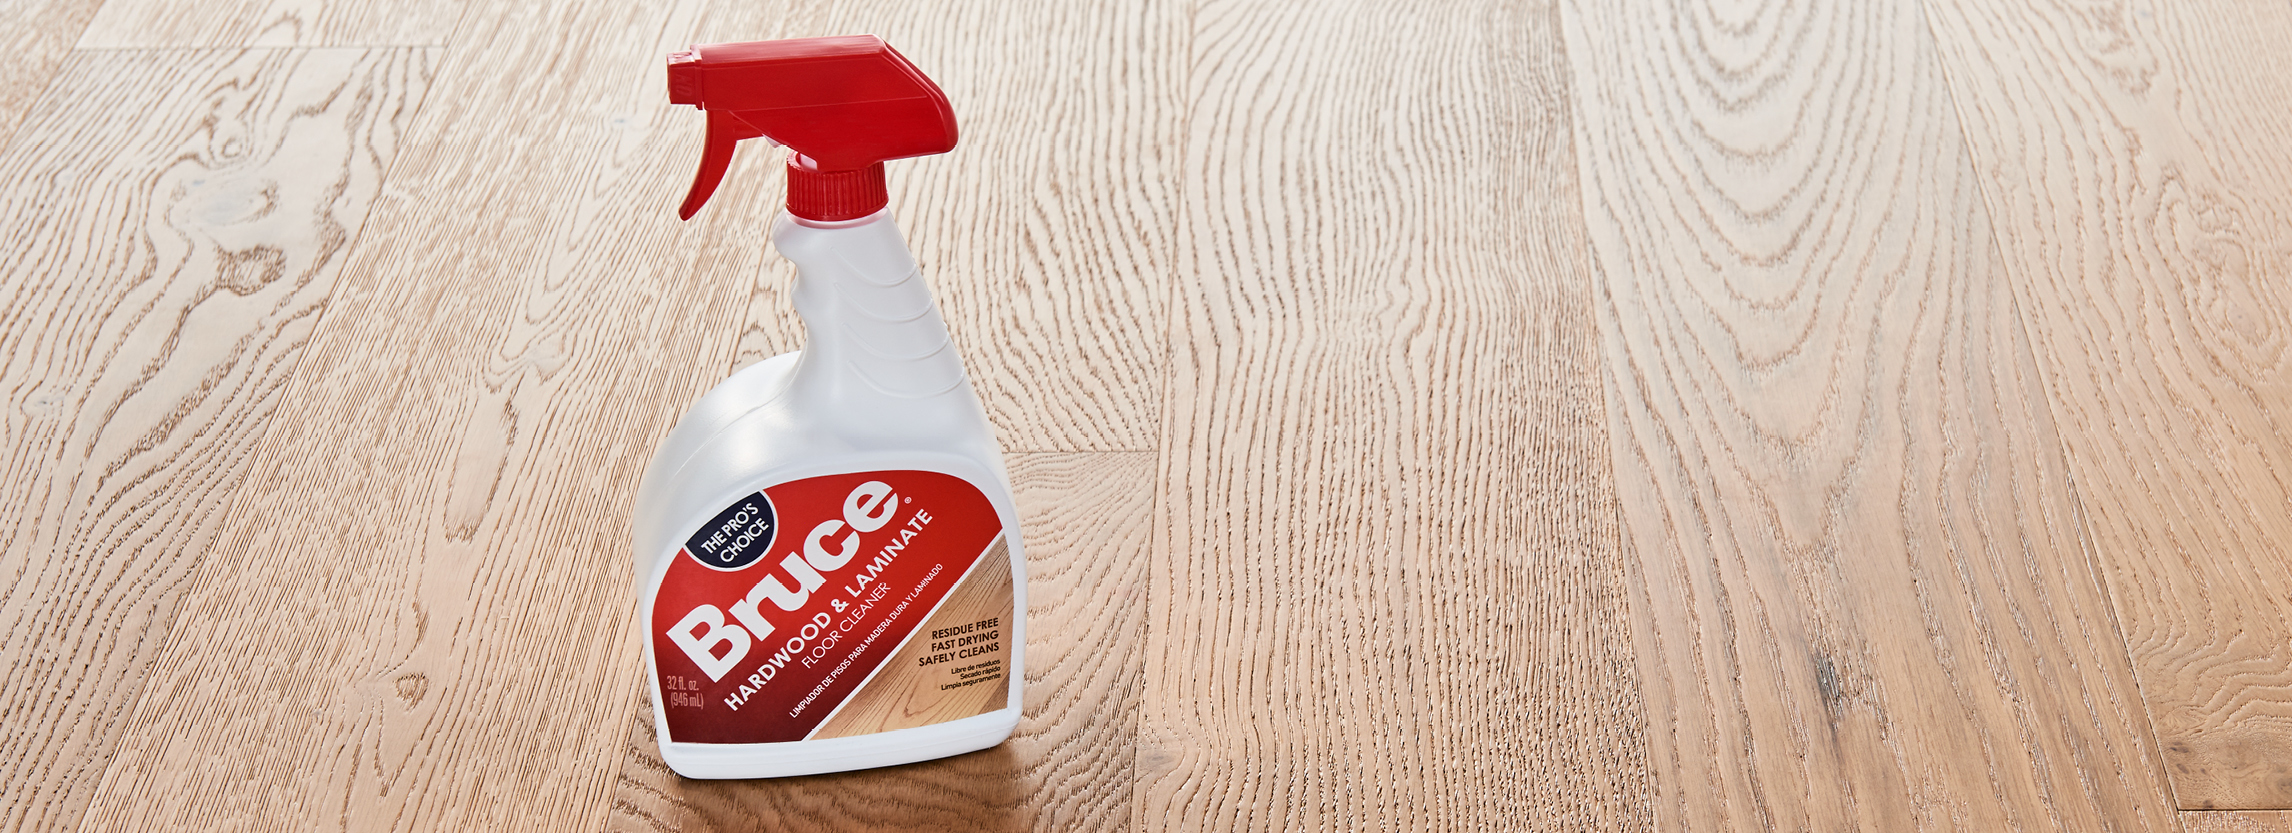 How To Care For Hardwood Floors, Impressions Hardwood Floor Cleaner